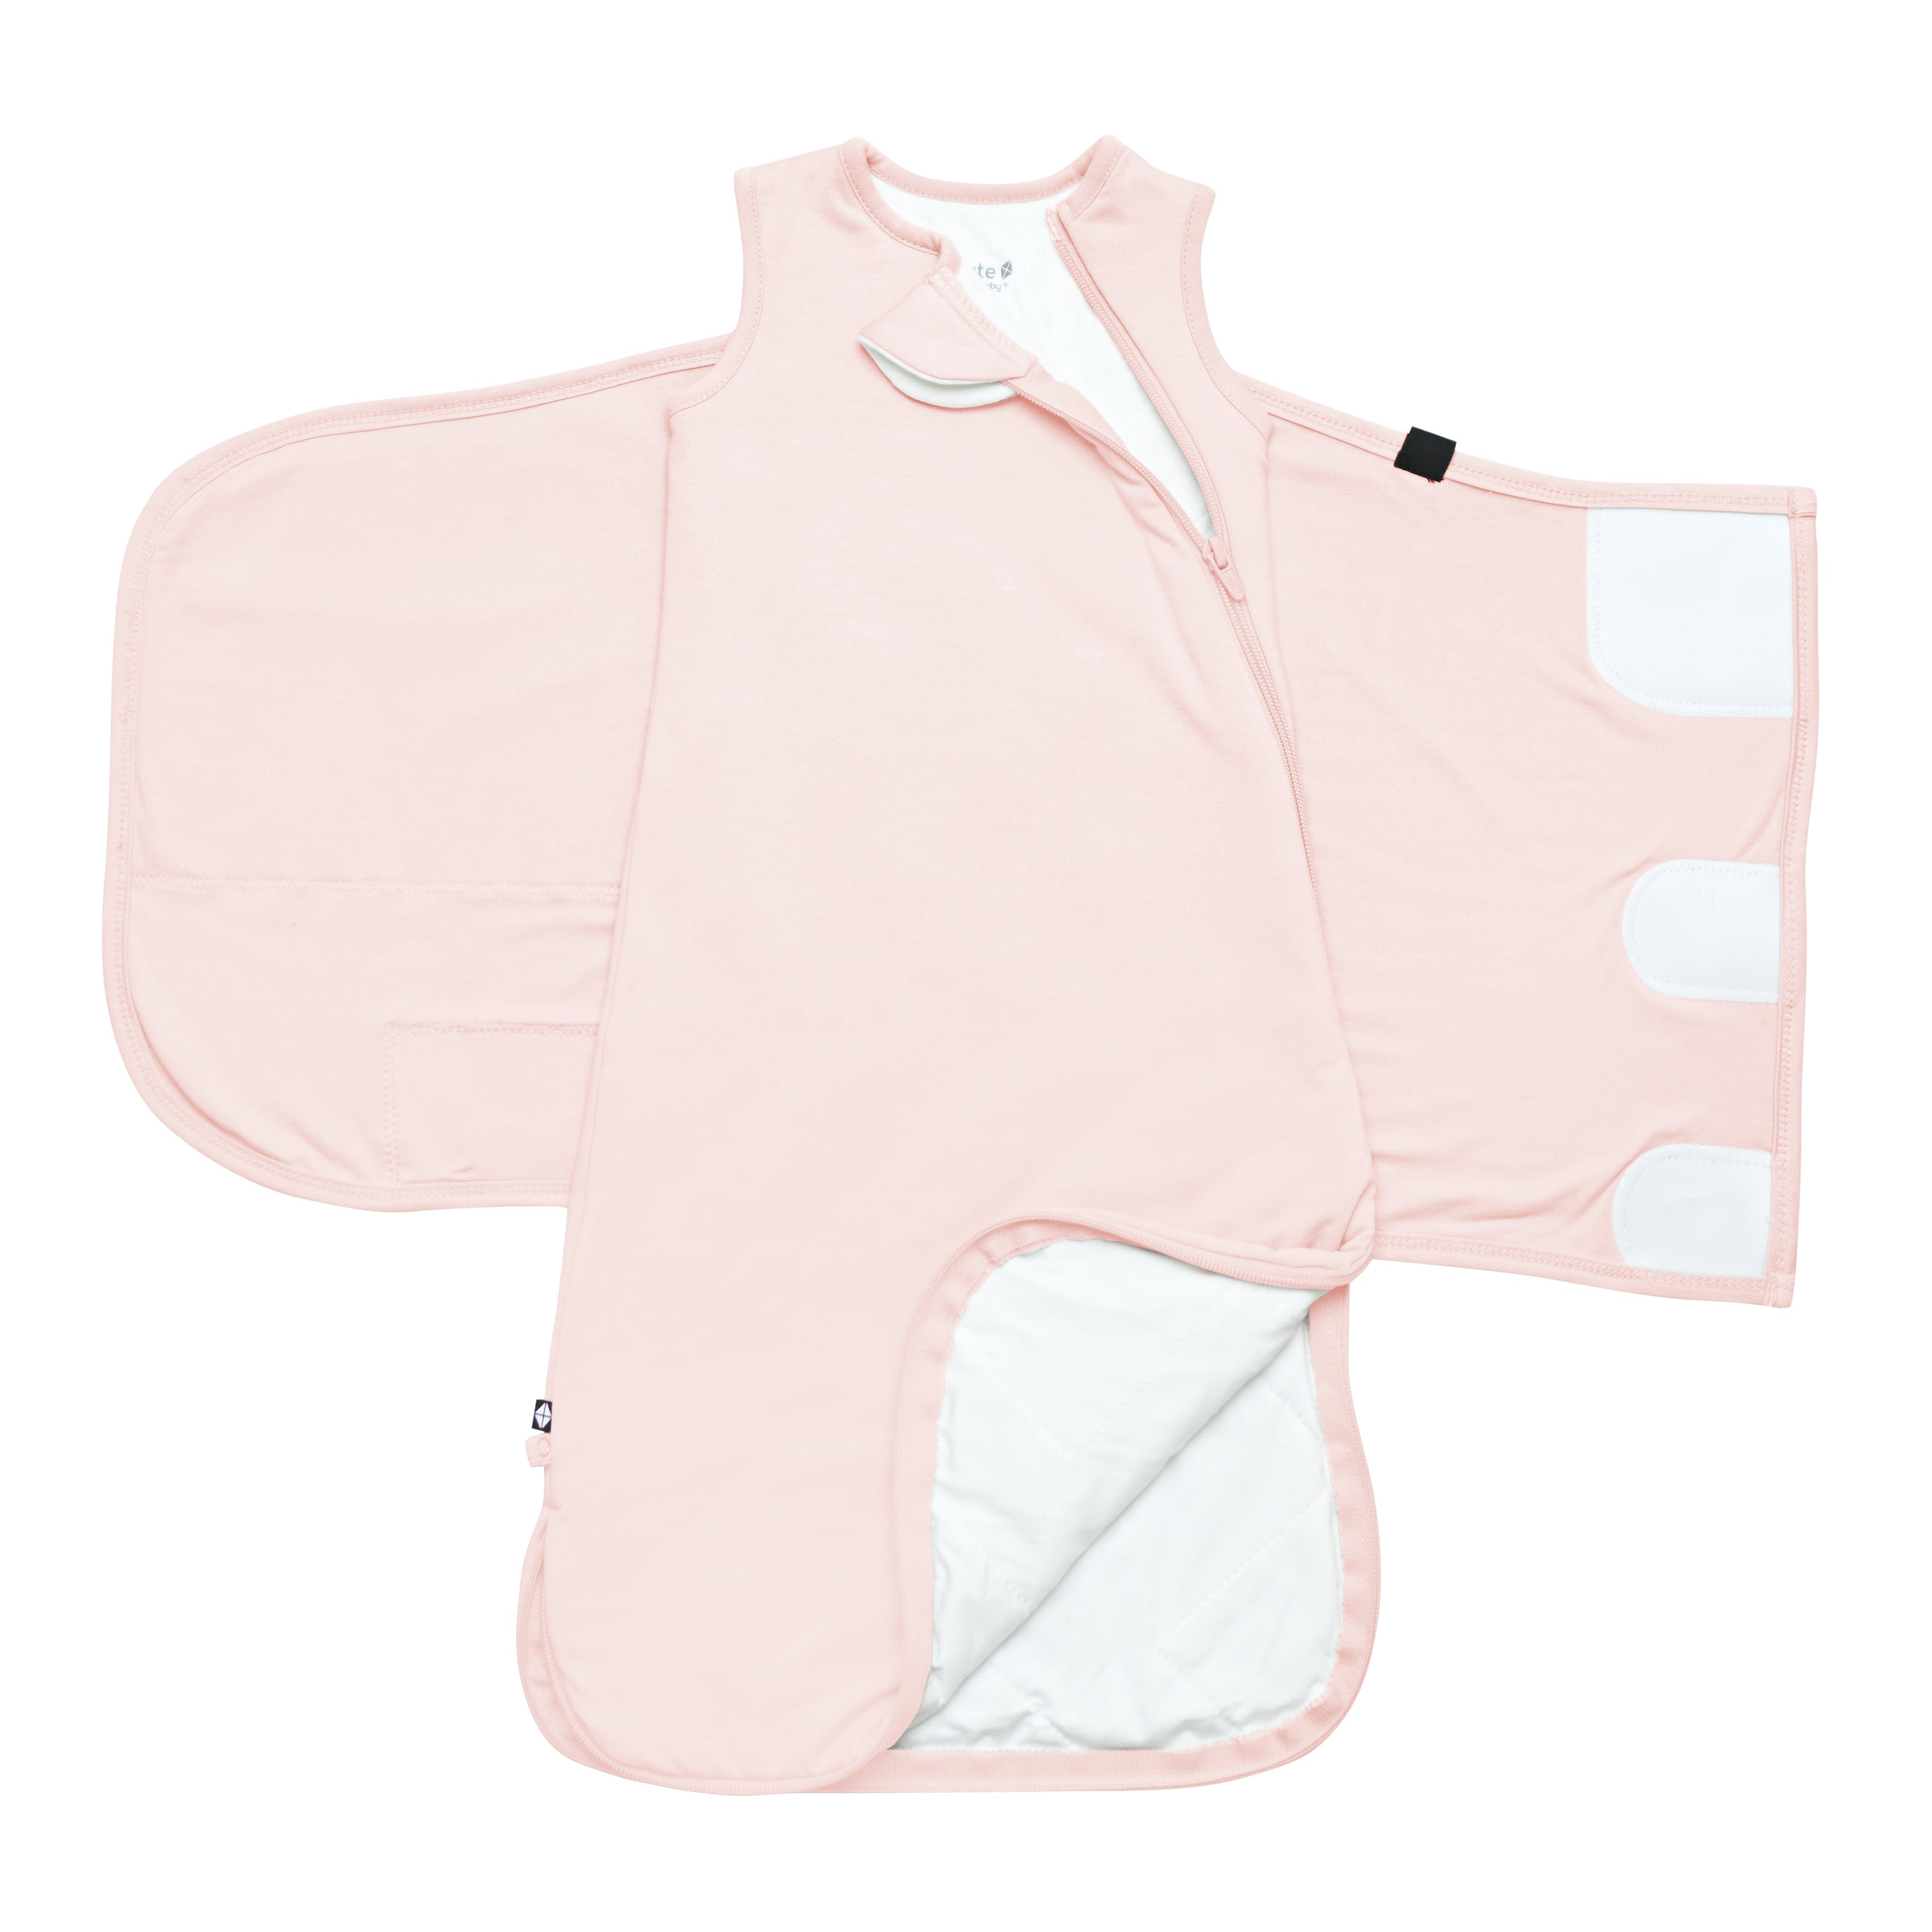 Kyte Baby bamboo Sleep Bag Swaddler in Blush with removable band